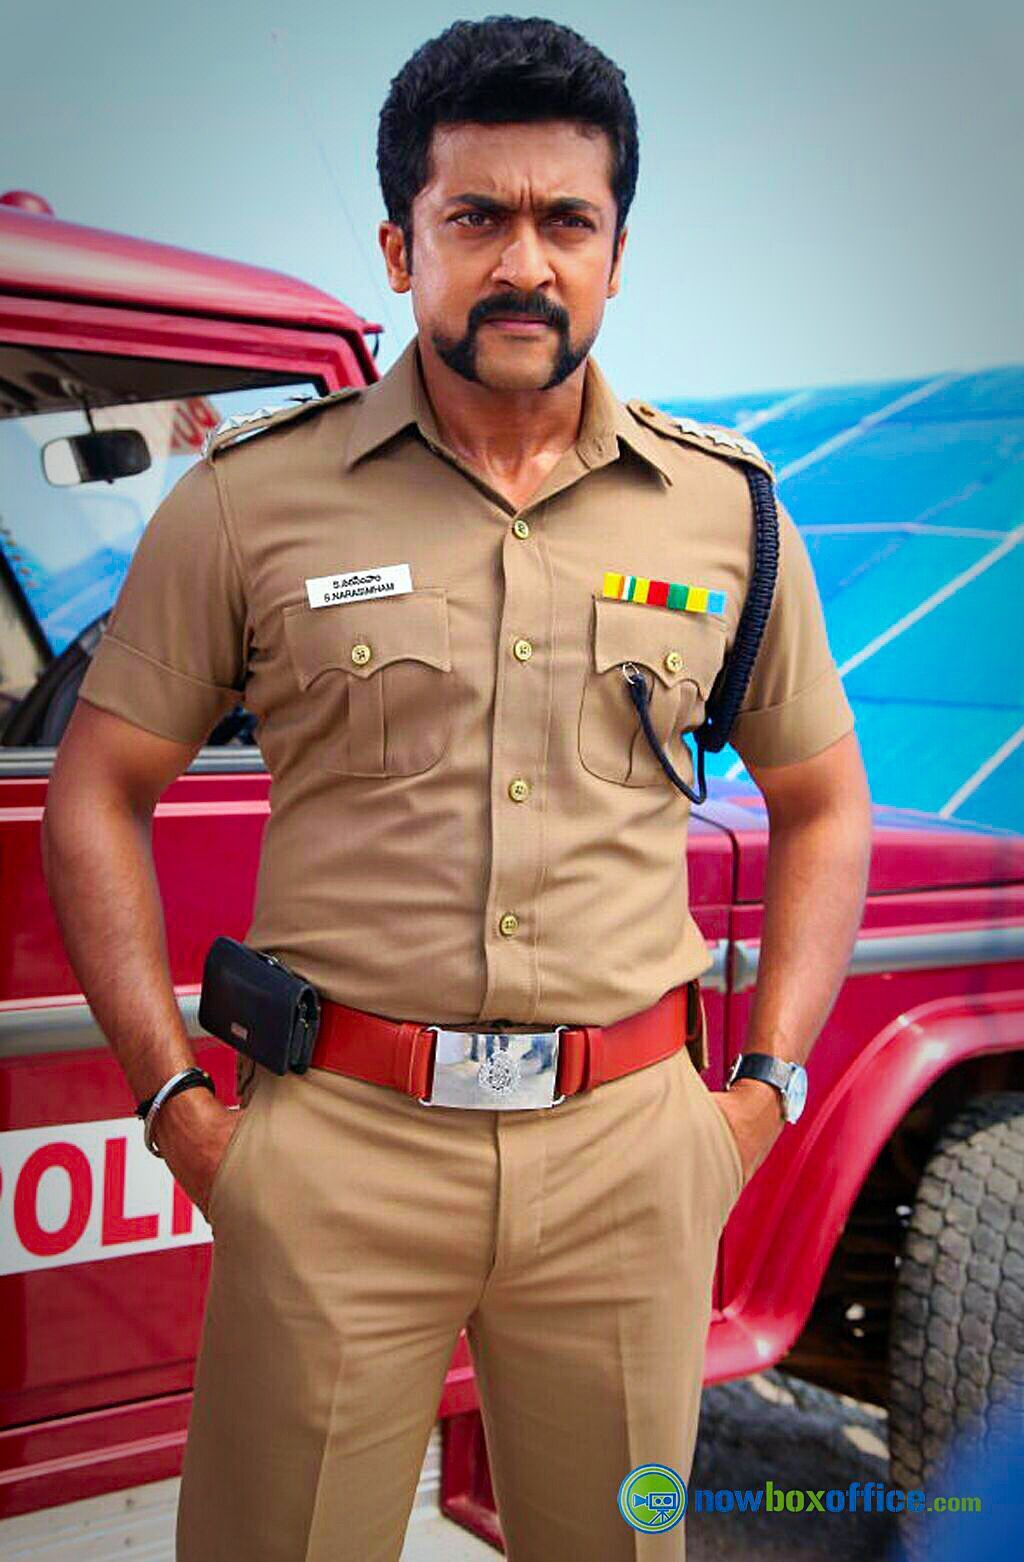 Suriya as a virile police officer with a cosmically awesome moustache in the Bollywood movie Singham. Indian police service, Surya actor, Police uniforms